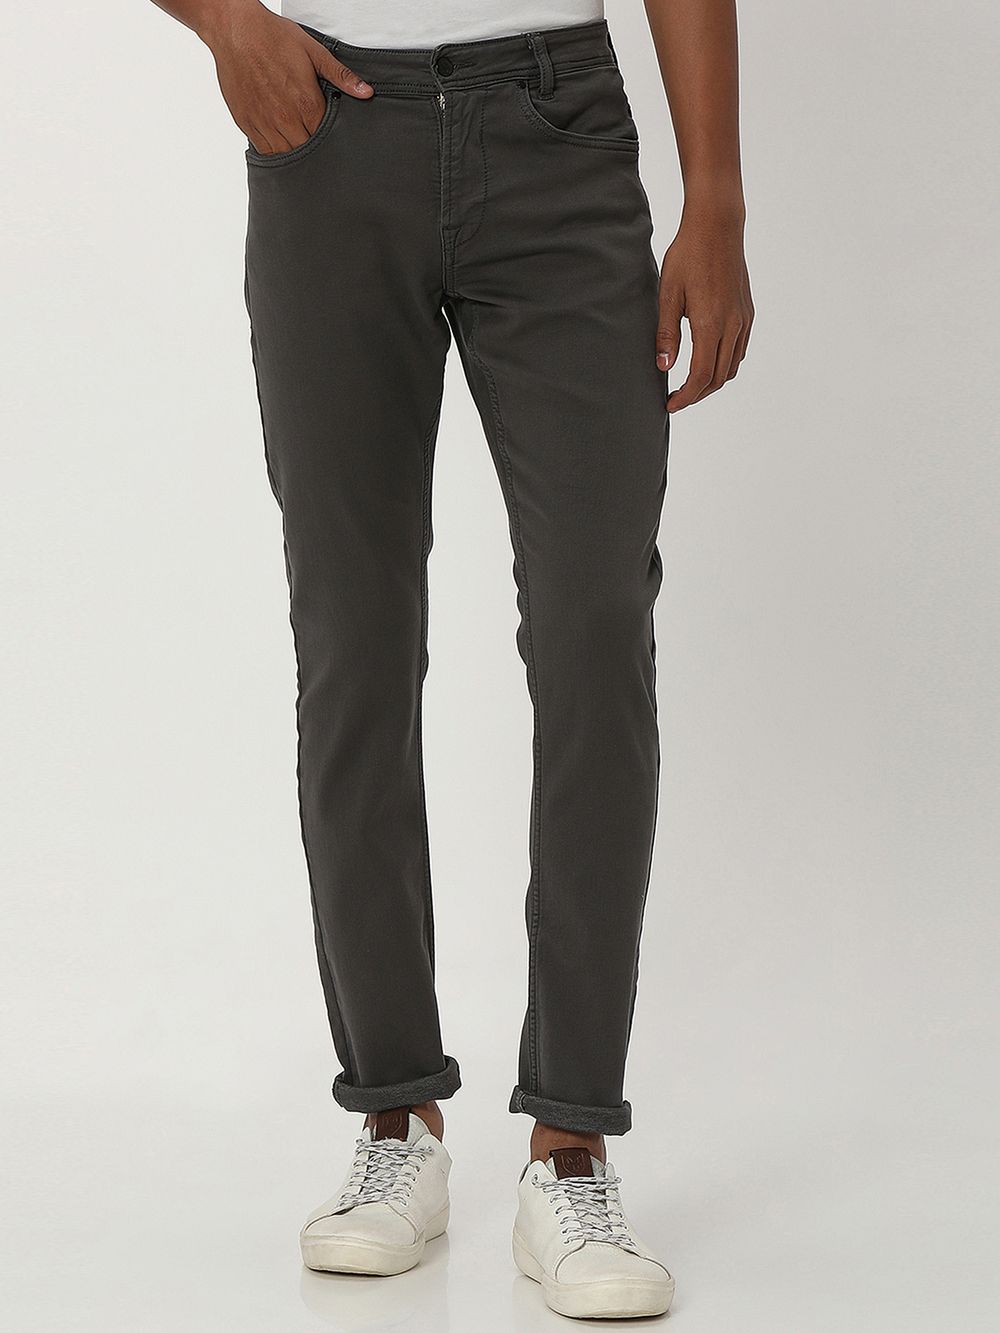 Charcoal Skinny Fit Superstretch Coloured Jeans